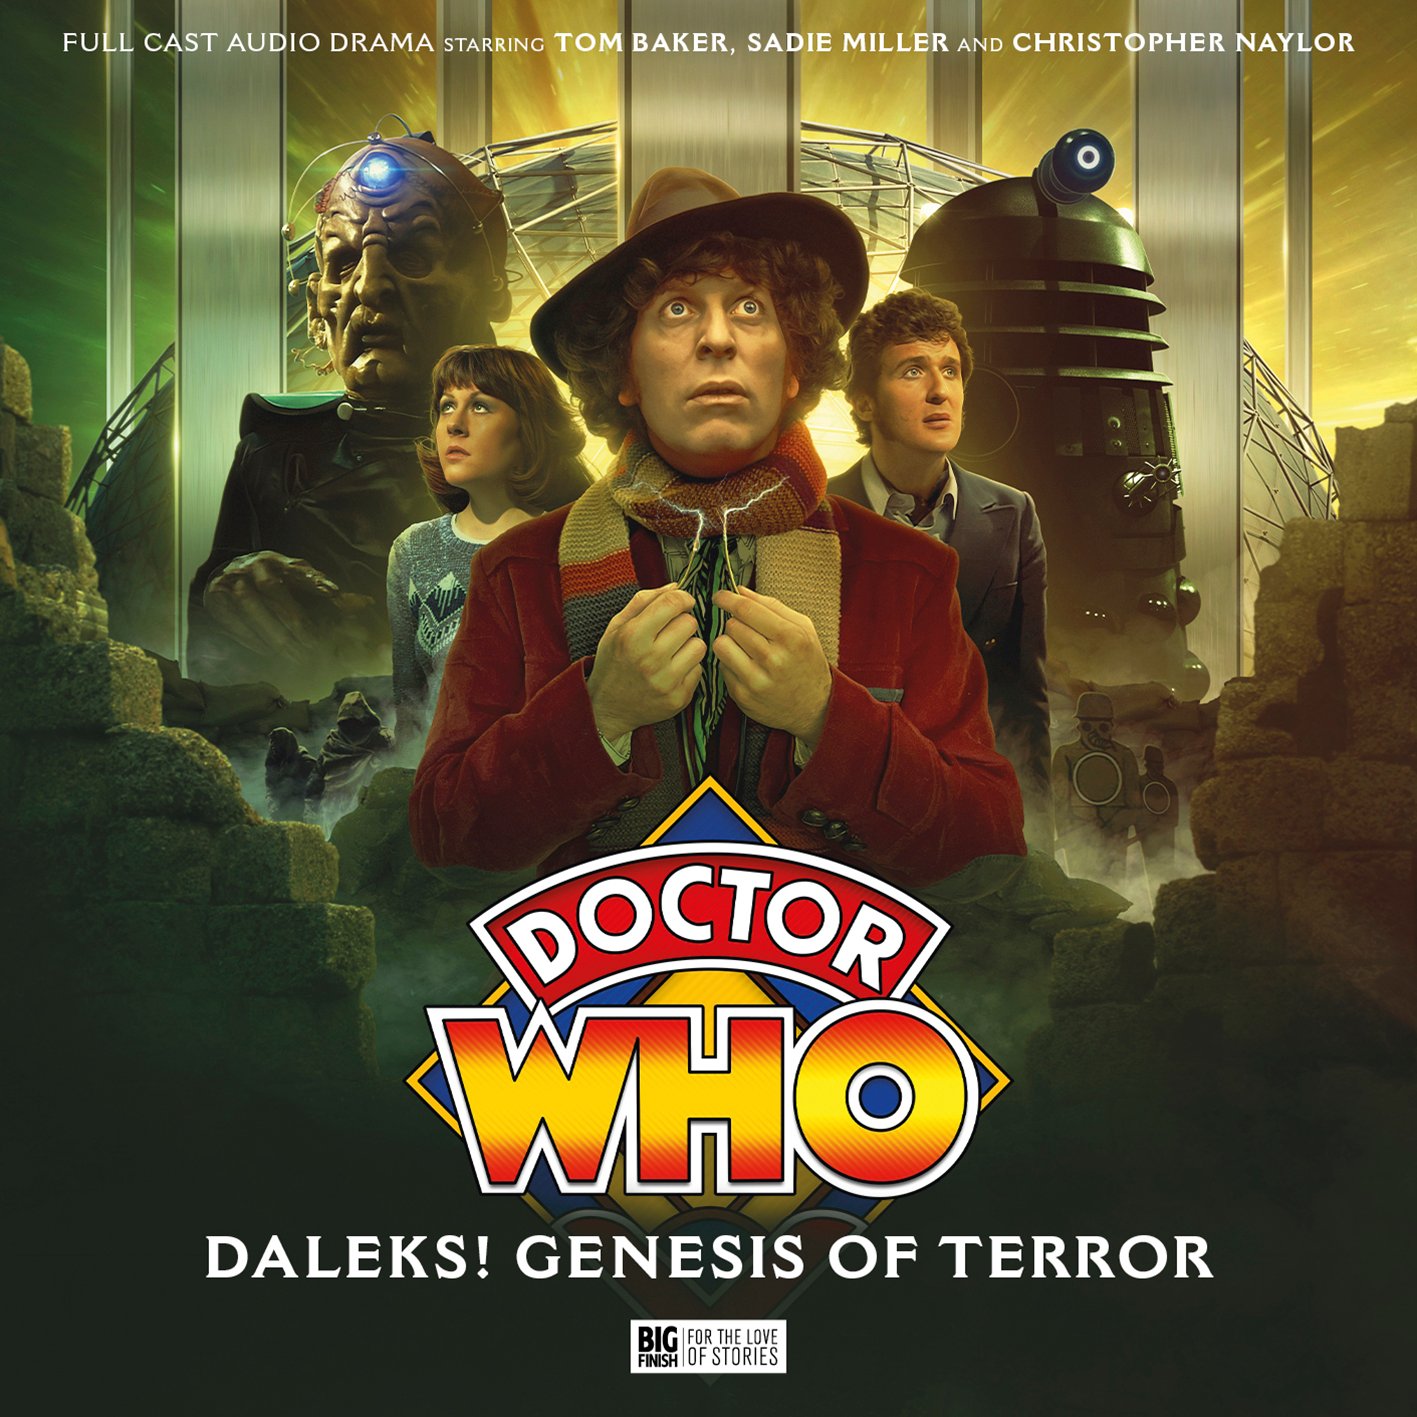 Reviewed: Big Finish’s Doctor Who Lost Stories – Daleks! Genesis of Terror